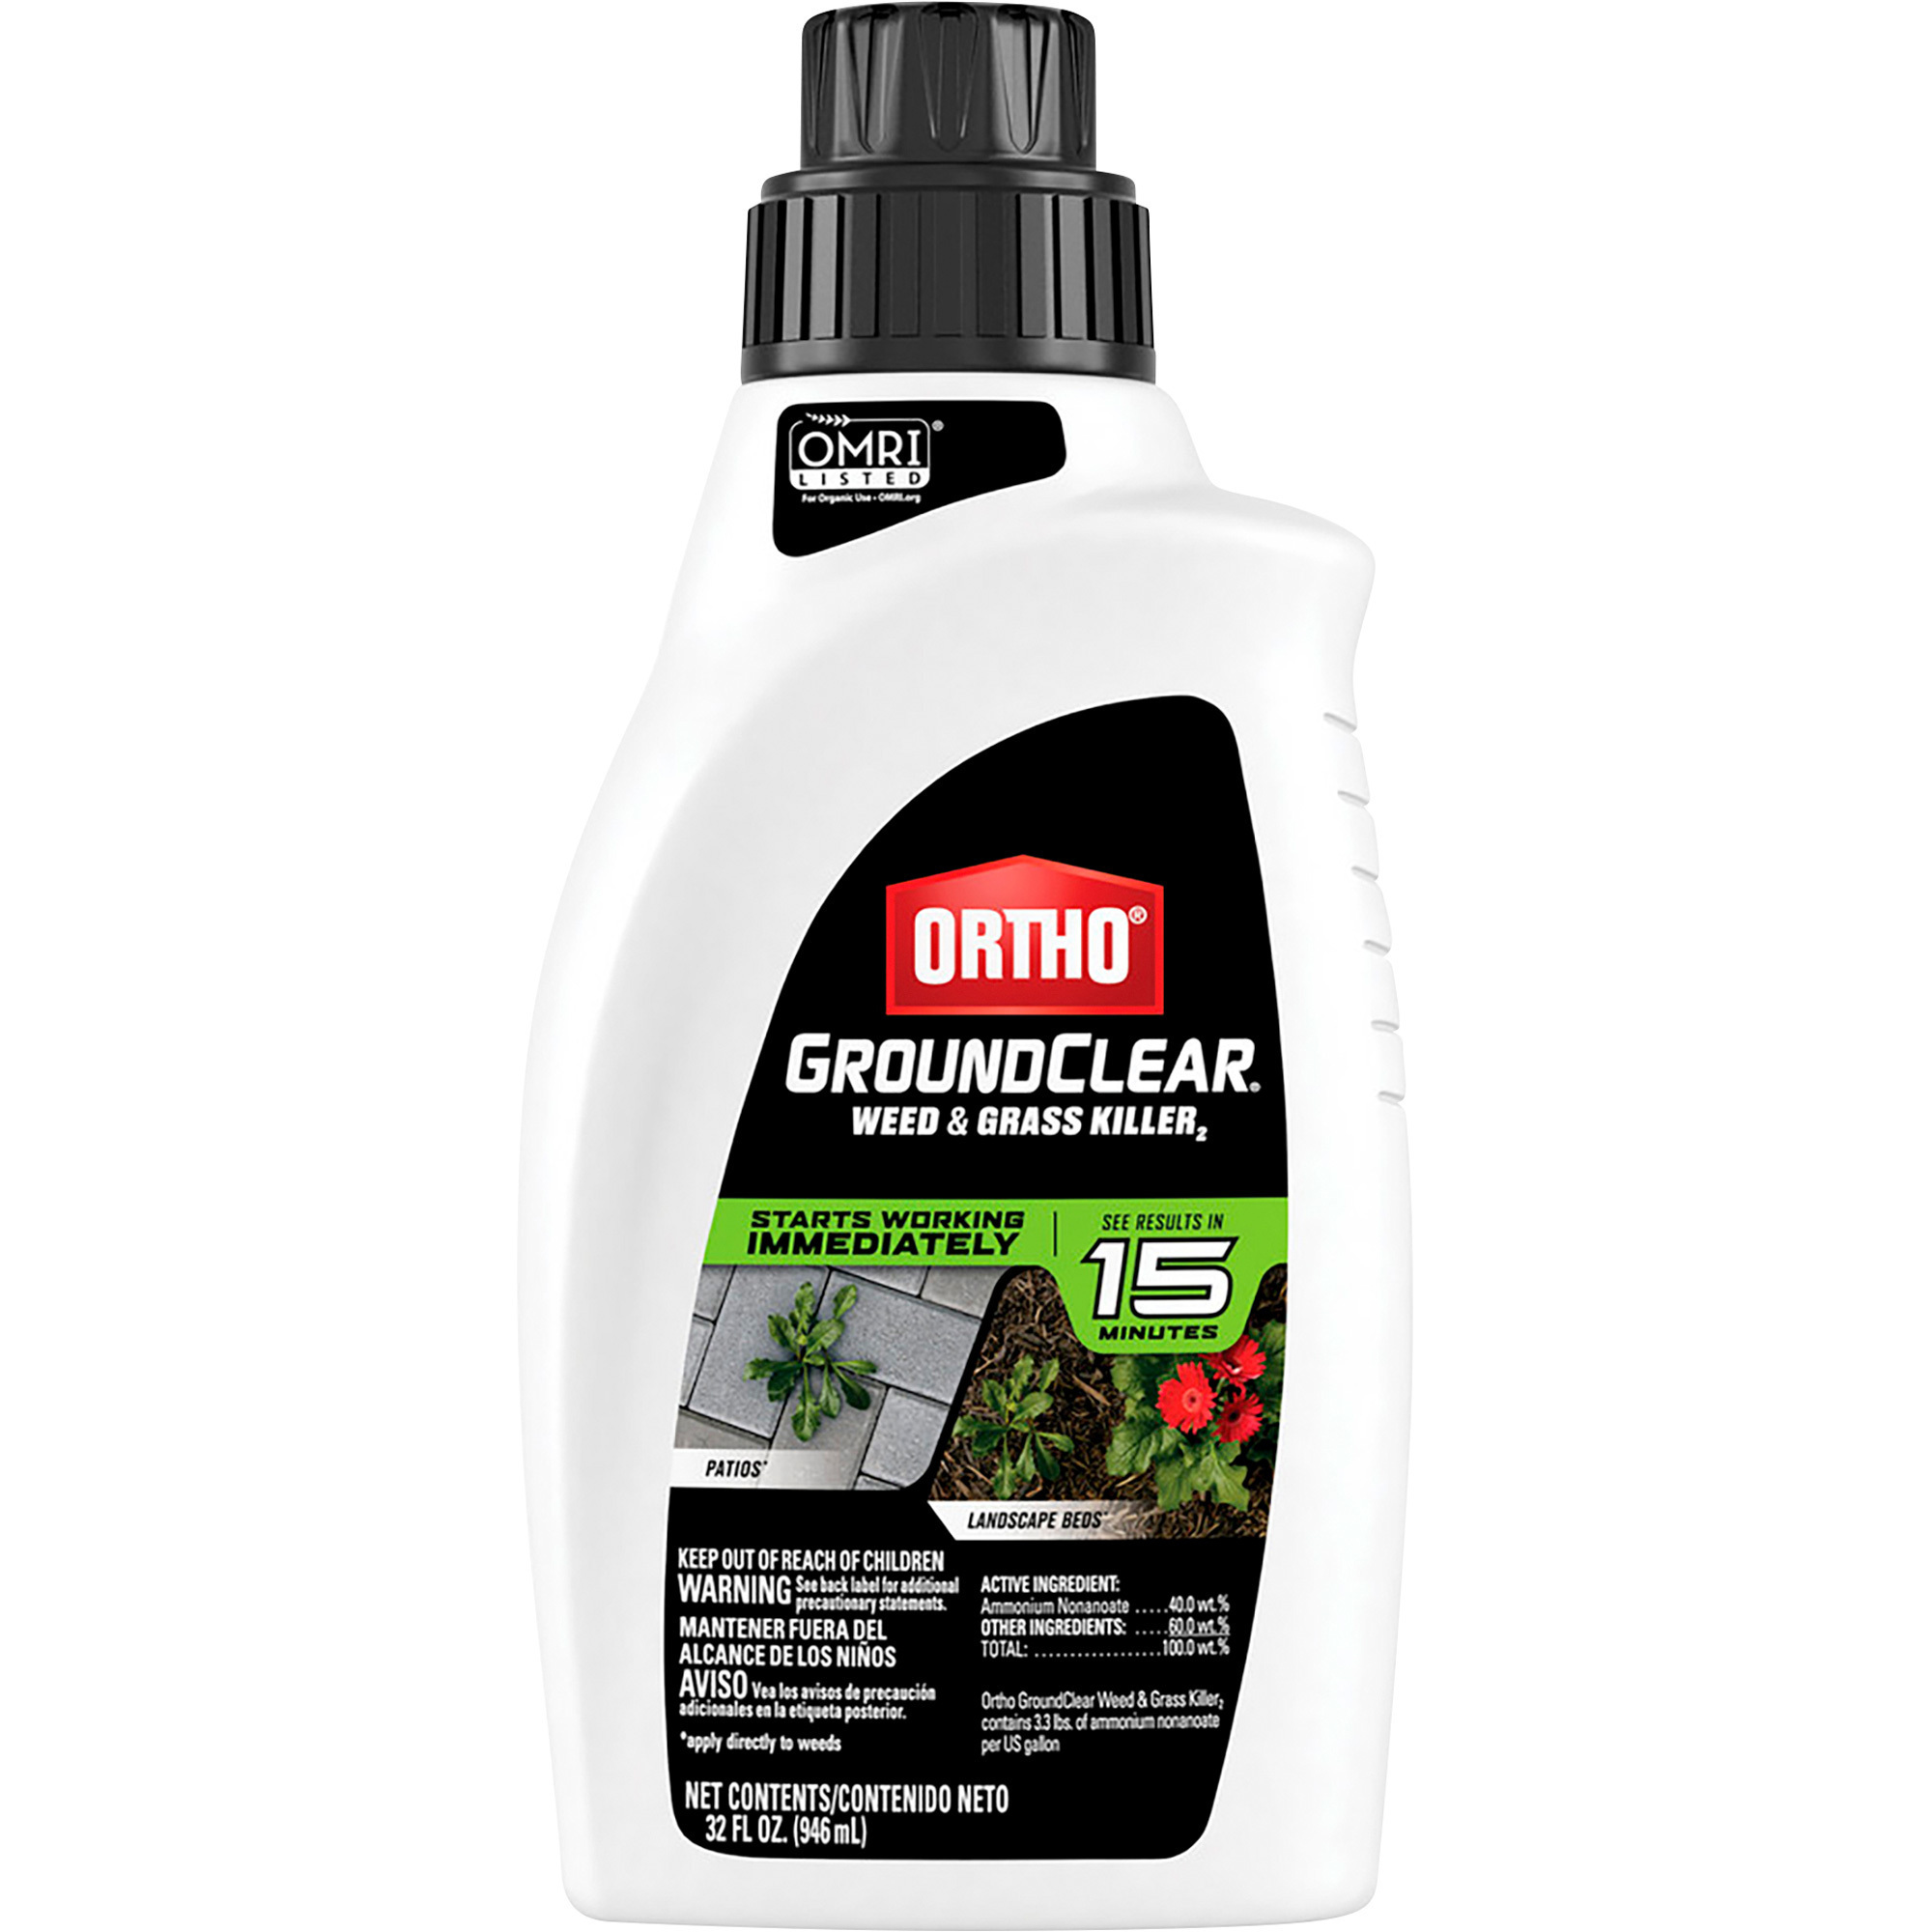 Ortho GroundClear Weed & Grass Killer2 â 32-Oz. Bottle of Concentrate, Model 4650306